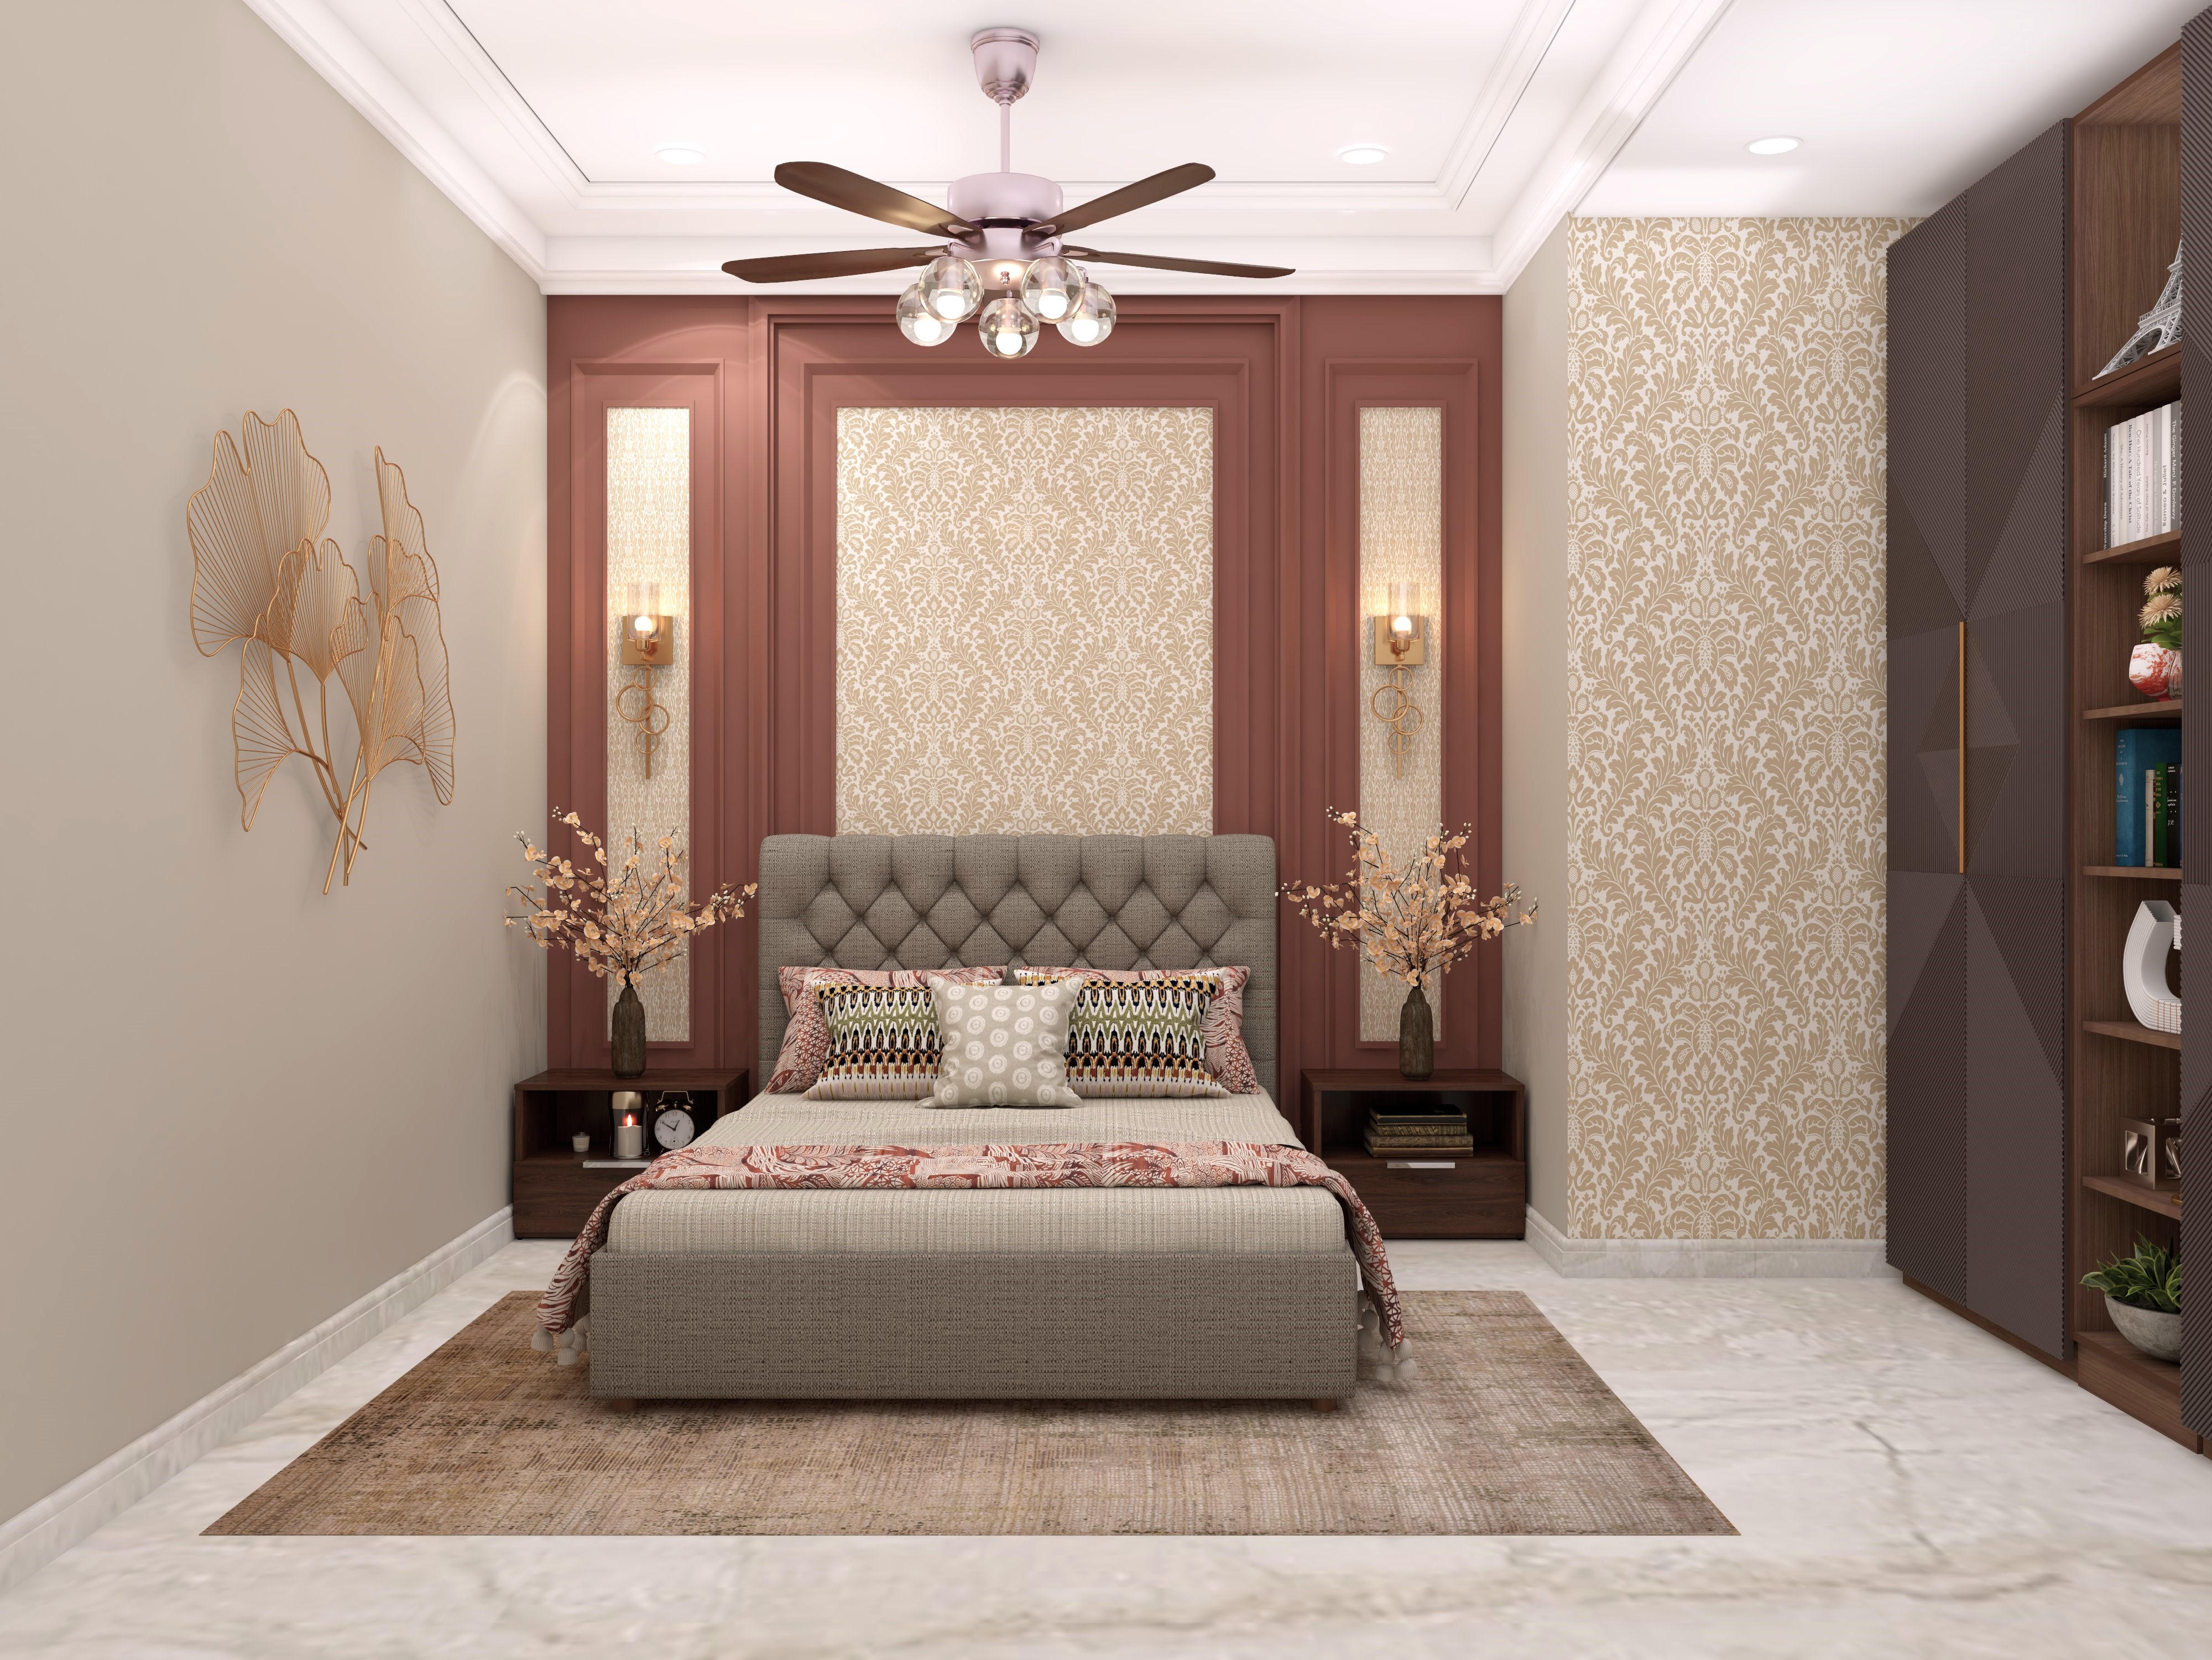 Modern Indian style guest bedroom with Royal furniture and white teak lights - Beautiful Homes